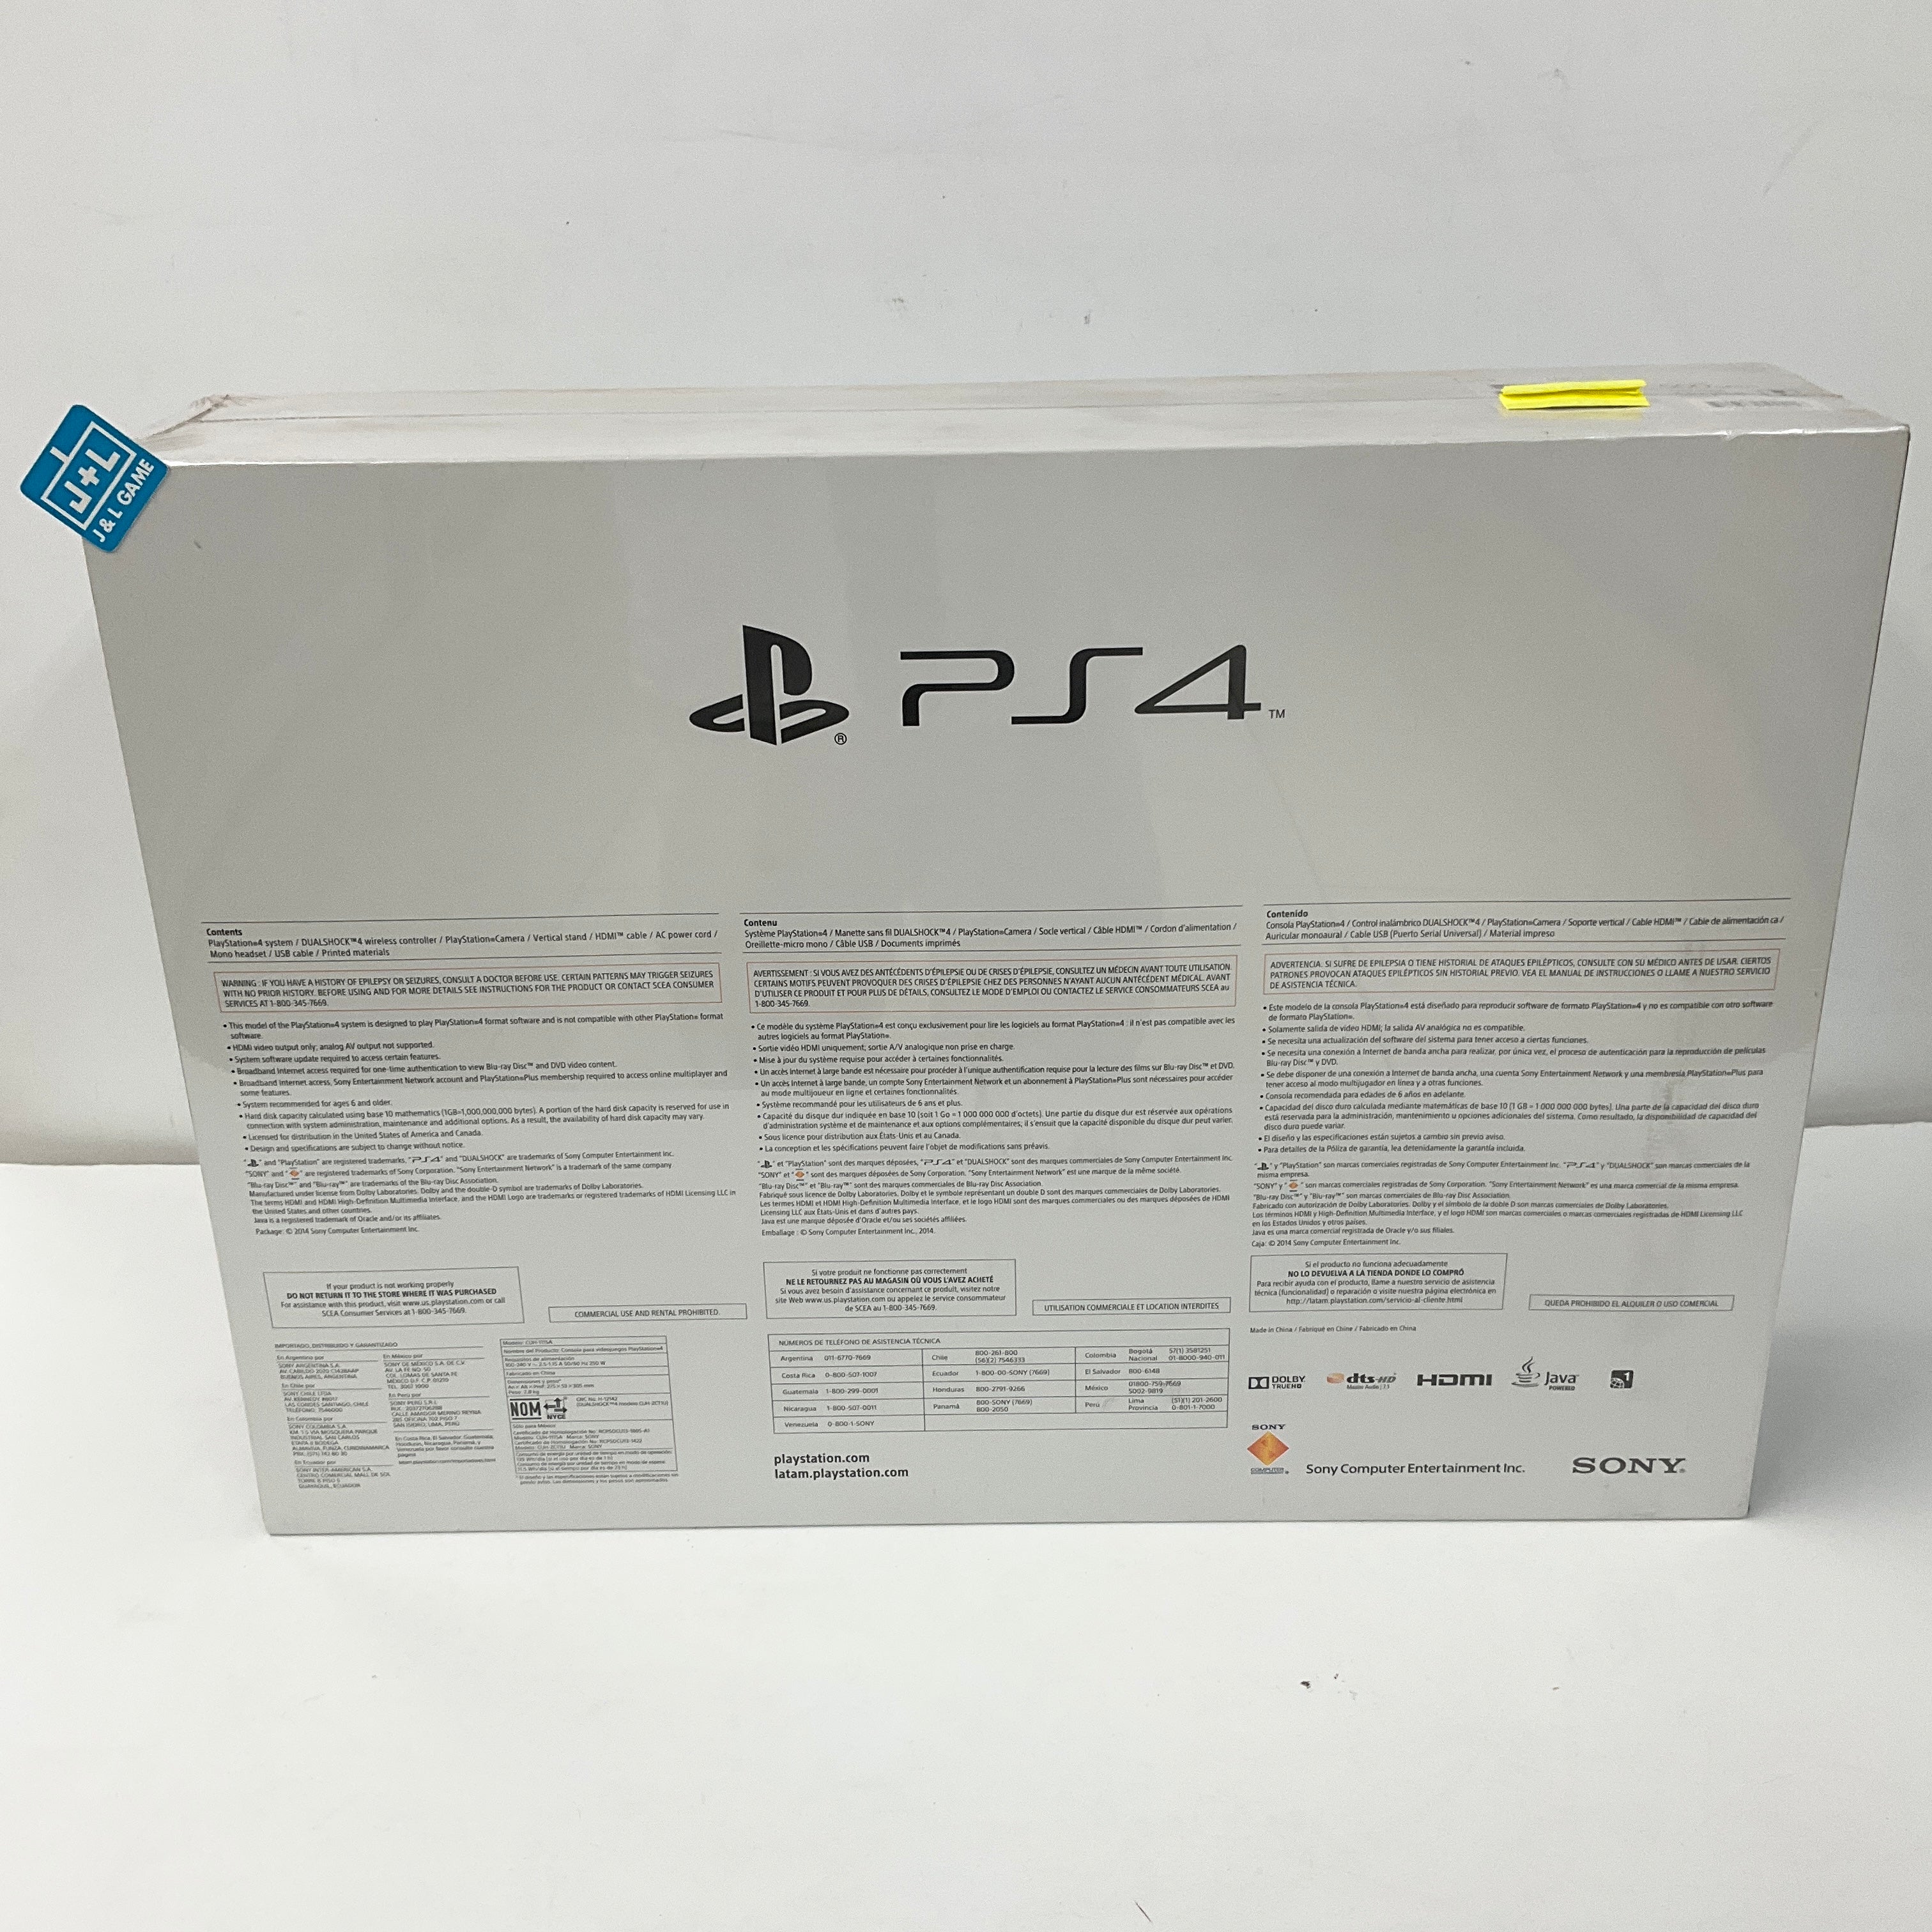 Sony Playstation 4 Console - 20th Anniversary Edition